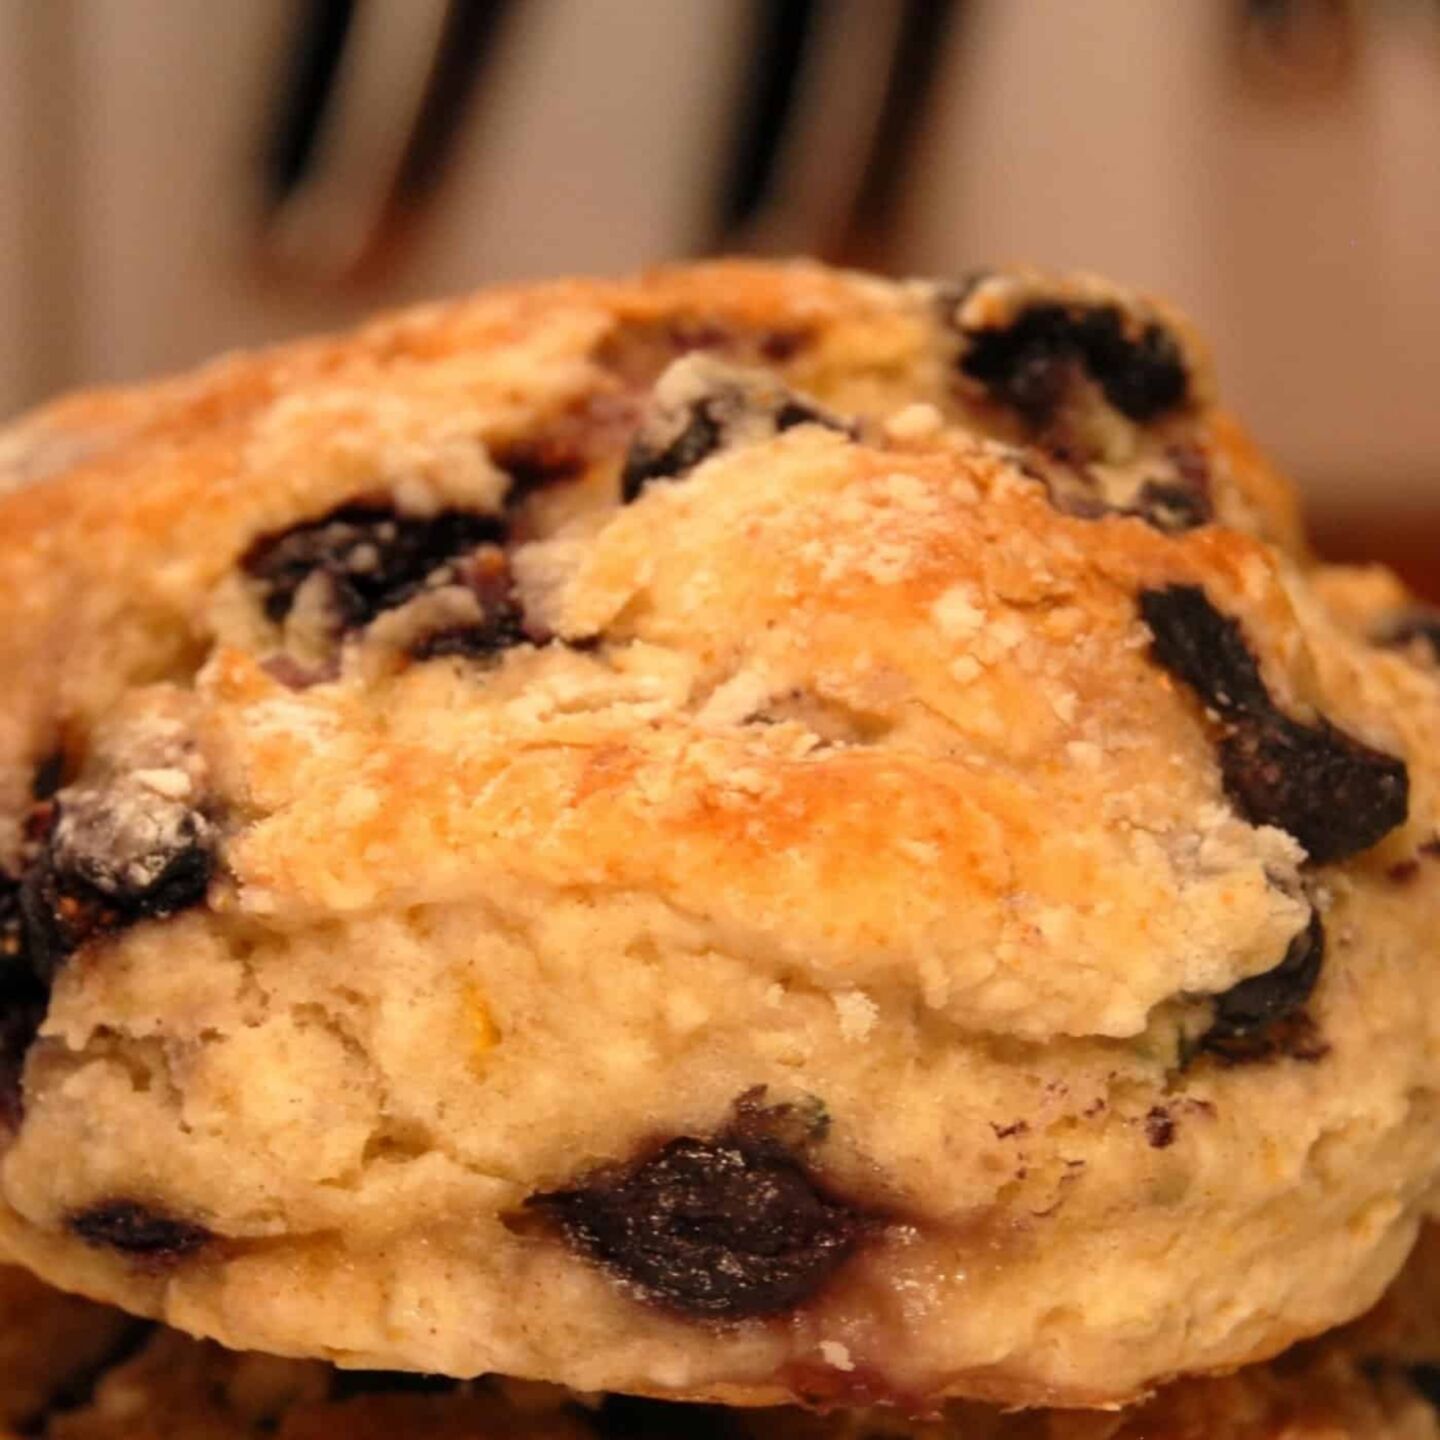 8. Blueberry biscuits